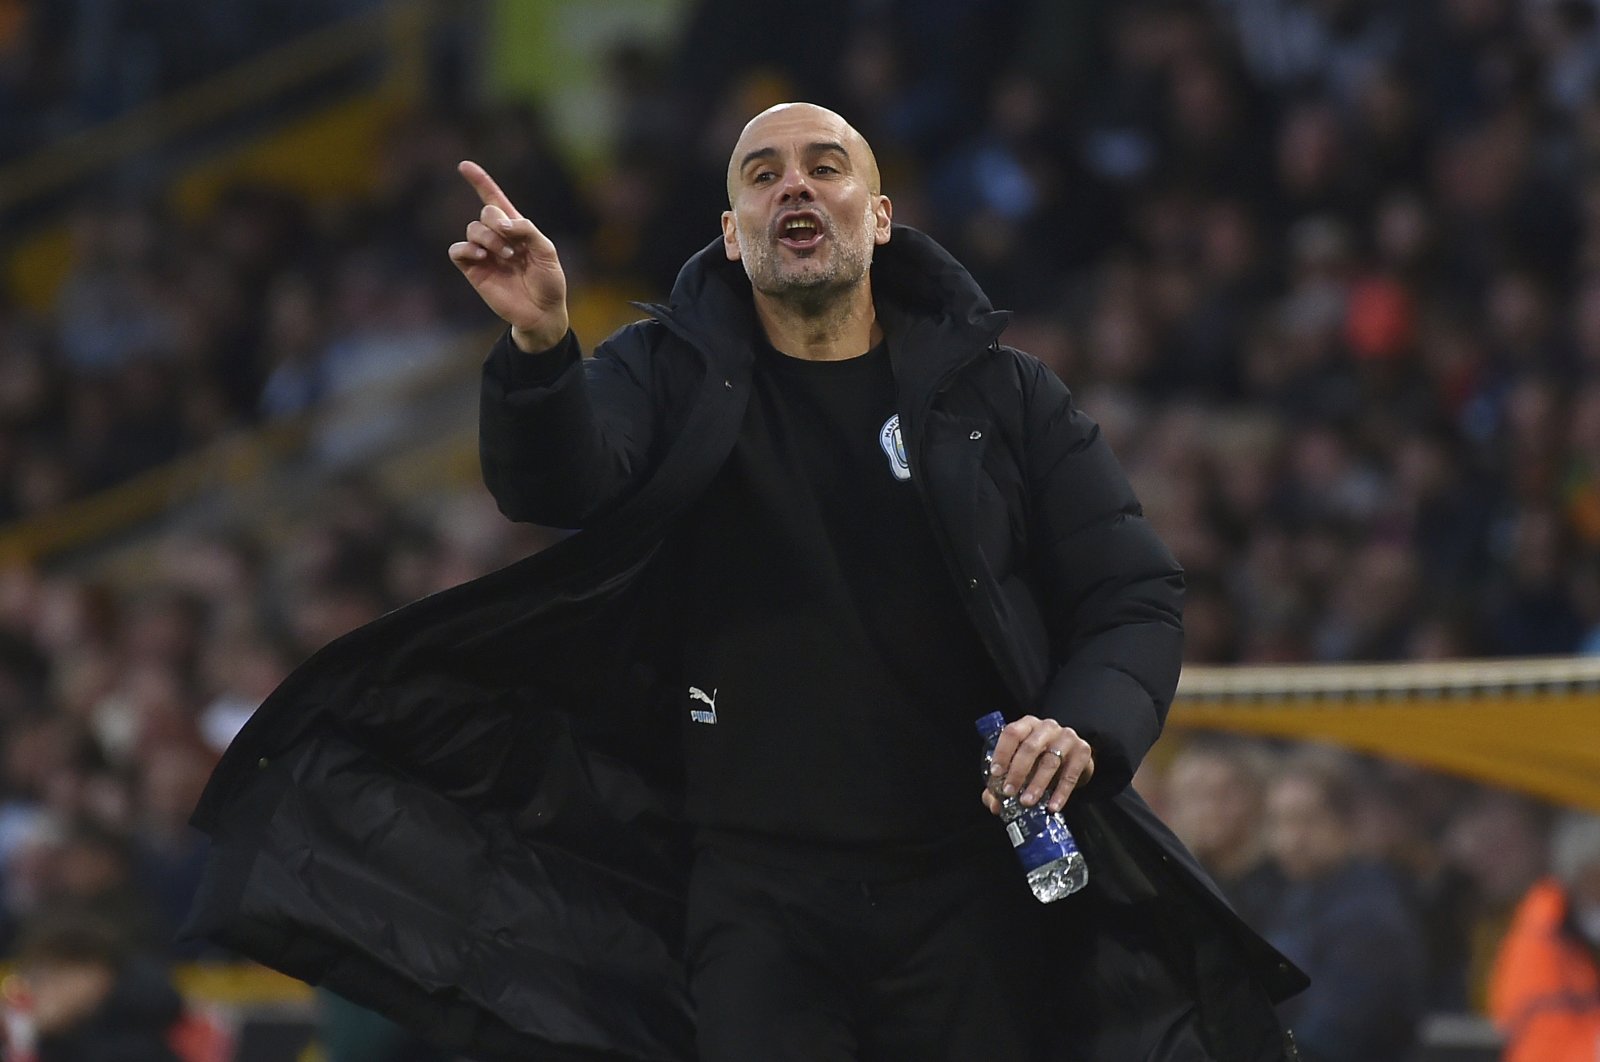 Man City manager Pep Guardiola during a Premier League match against the Wolves, Wolverhampton, England, May 11, 2022. (AP Photo)